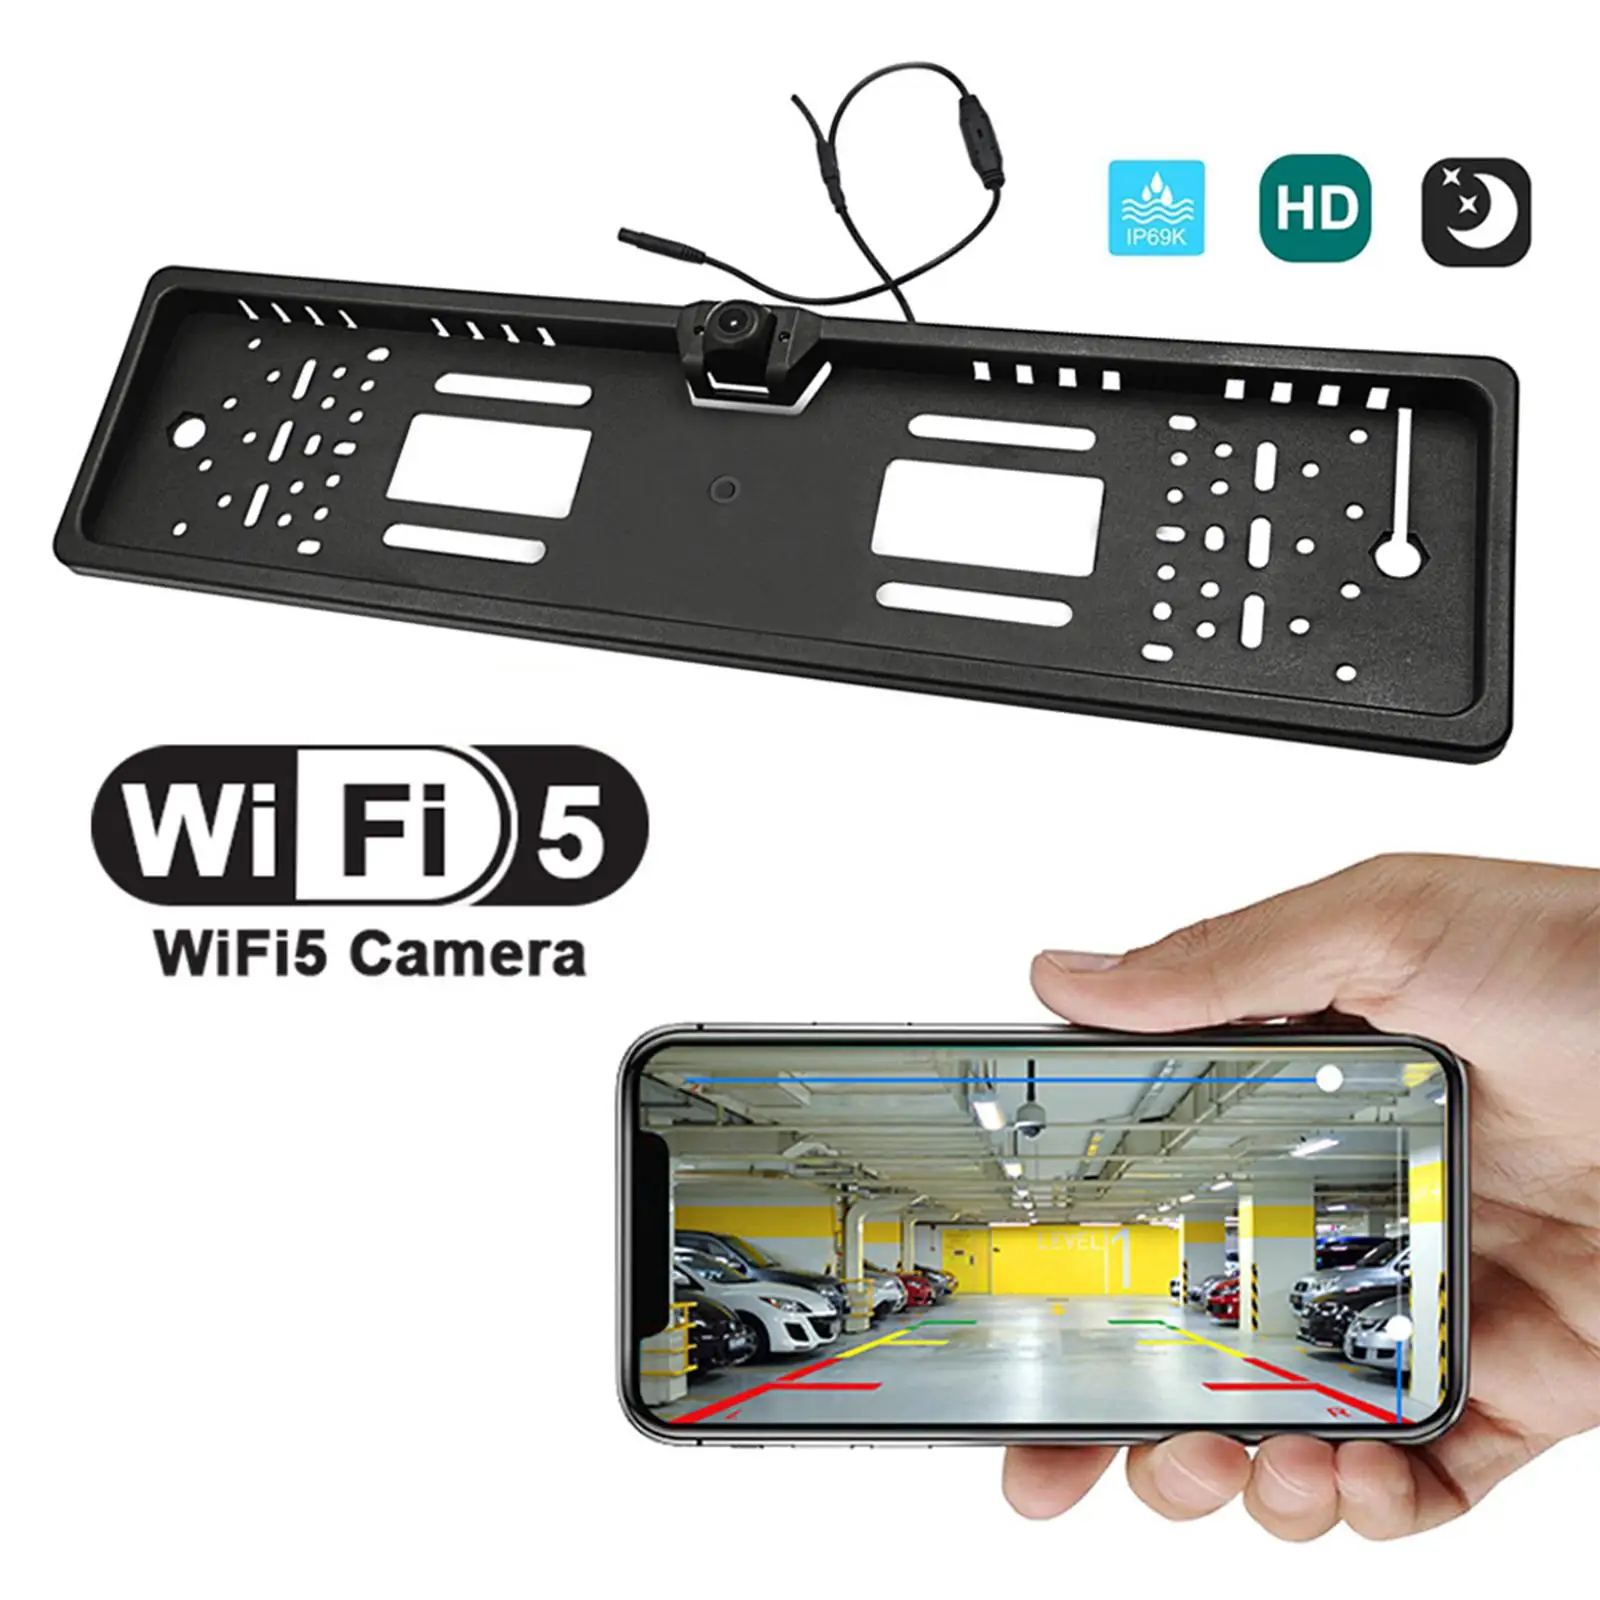 EU Plate Frame Camera Wide Viewing Angle 5G WiFi Waterproof Replacement Holder for European Cars Auto Parts